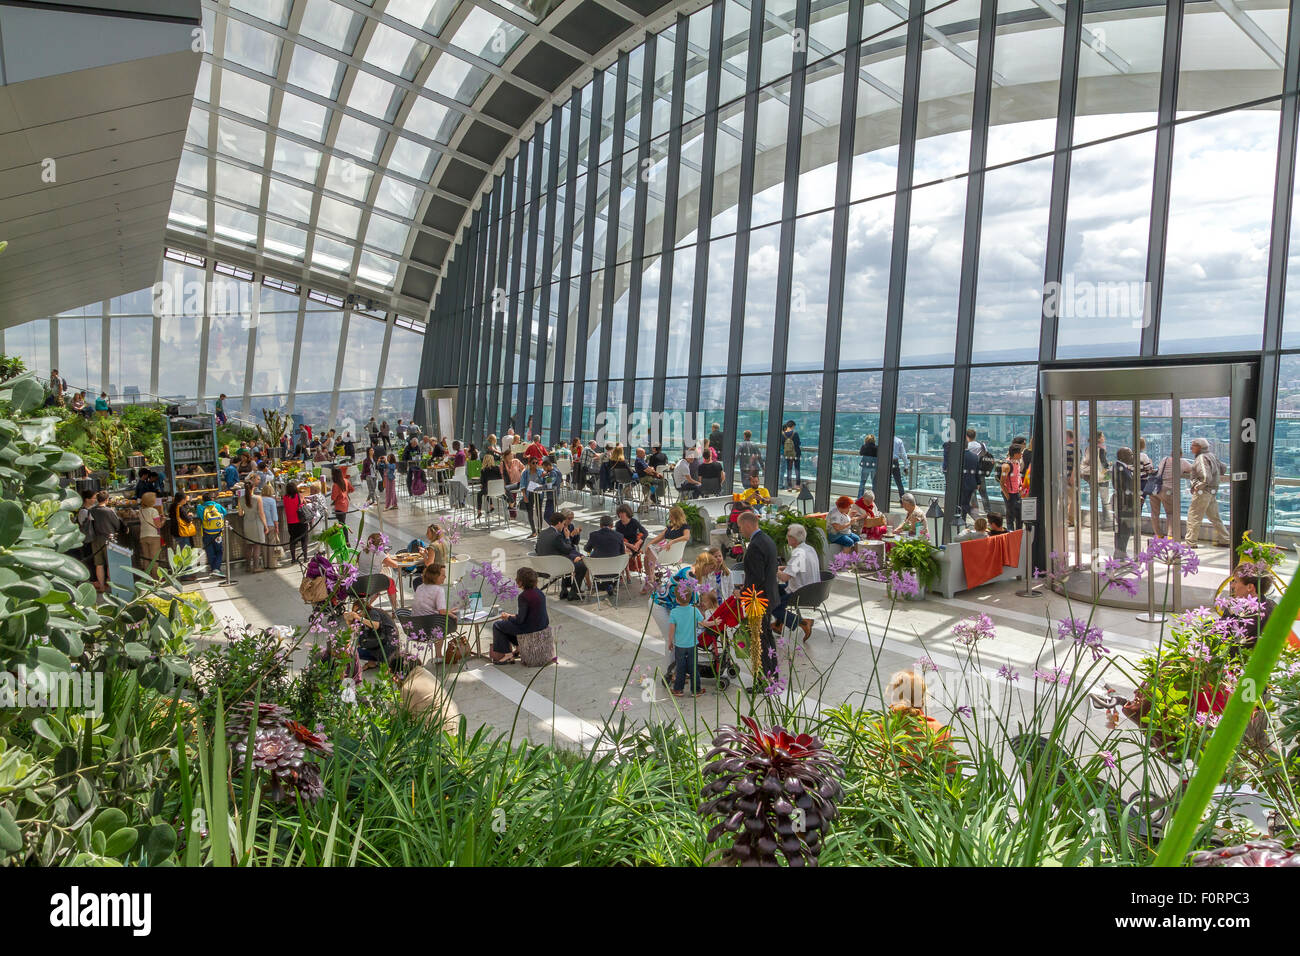 The Sky Garden, a public viewing gallery at the top of 20 Fenchurch Street also known as The Walkie Talkie Building ,in The City Of London, UK Stock Photo